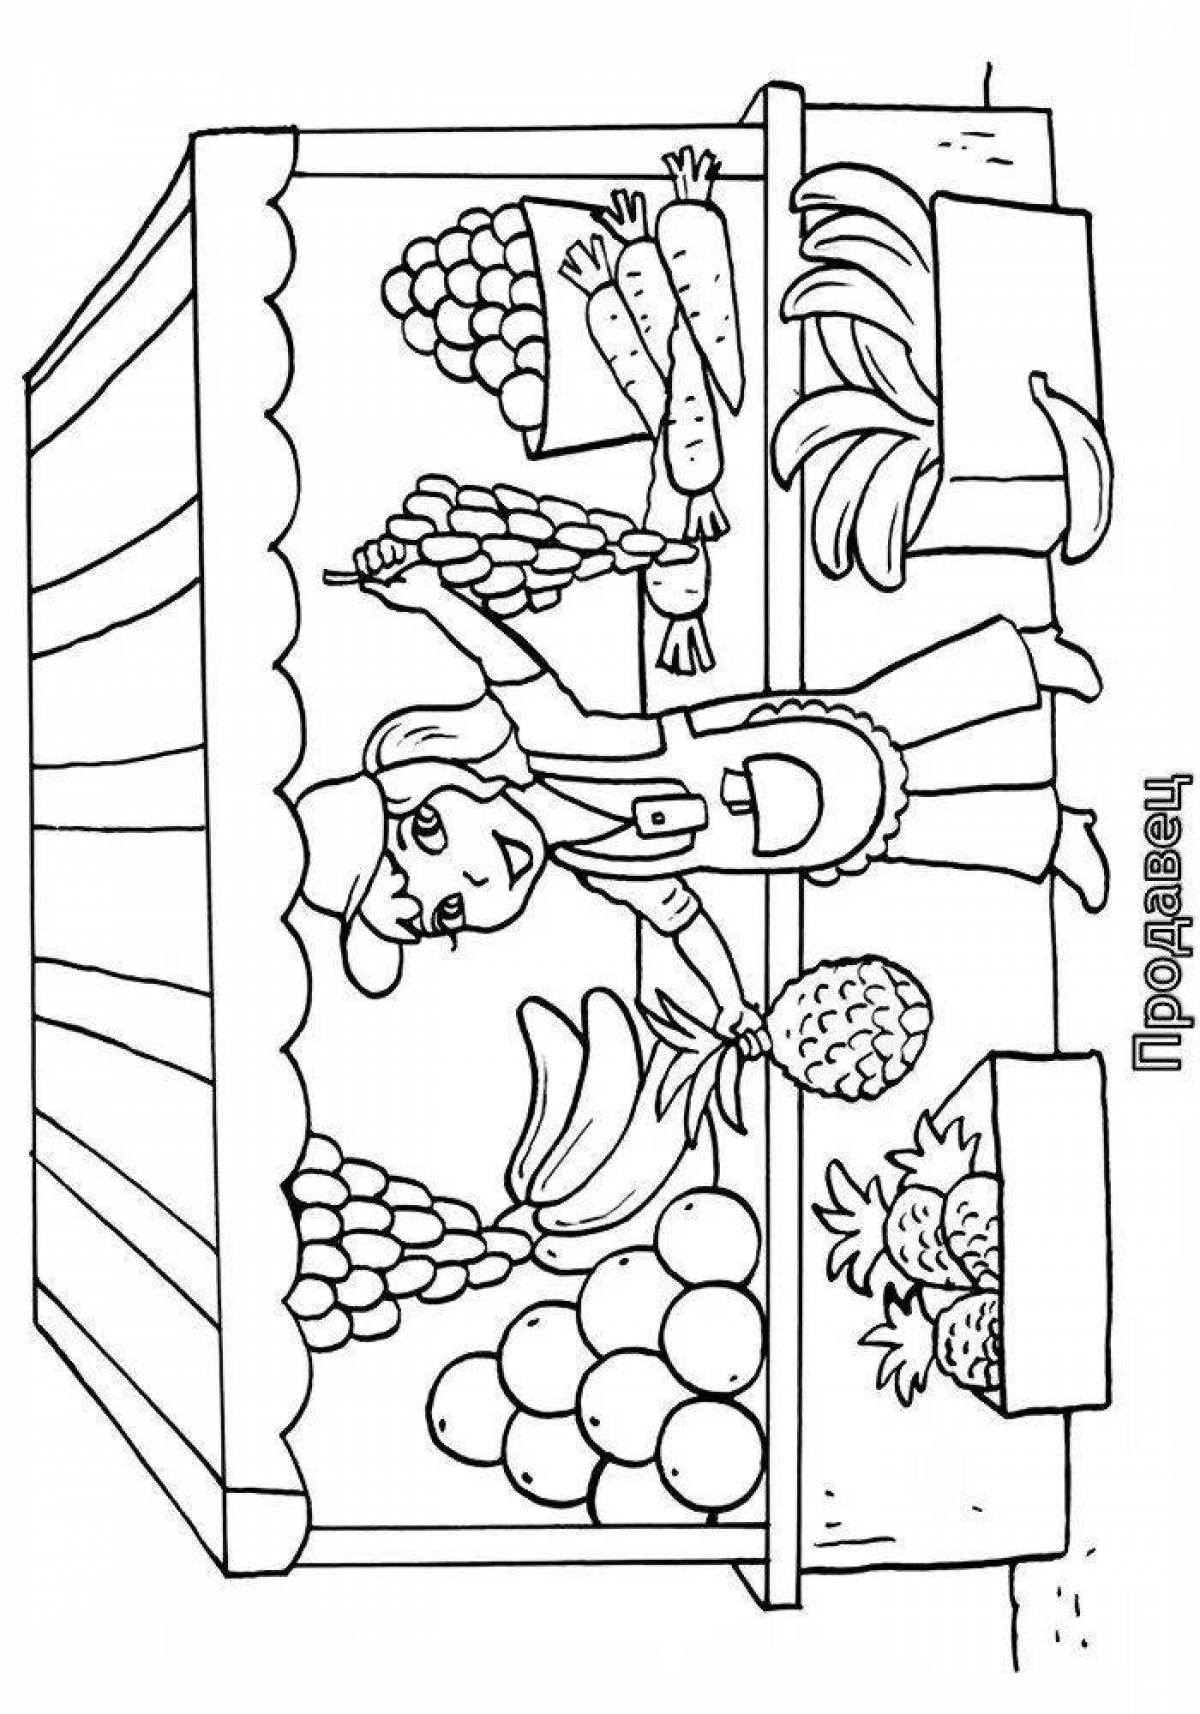 Sales profession coloring page